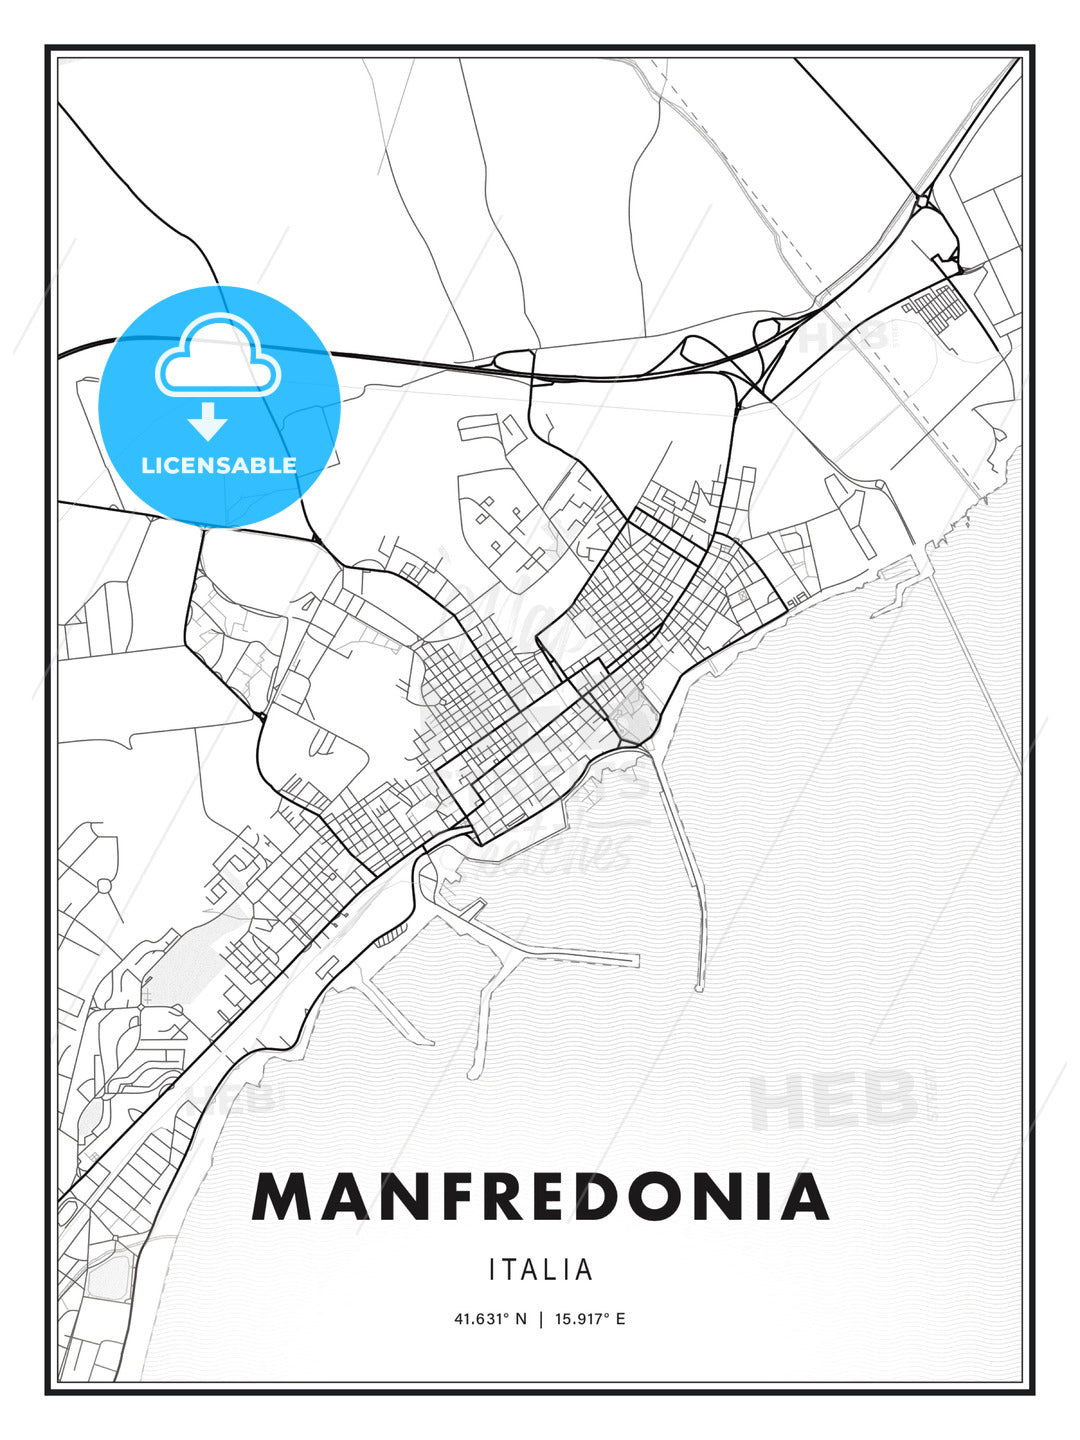 Manfredonia, Italy, Modern Print Template in Various Formats - HEBSTREITS Sketches